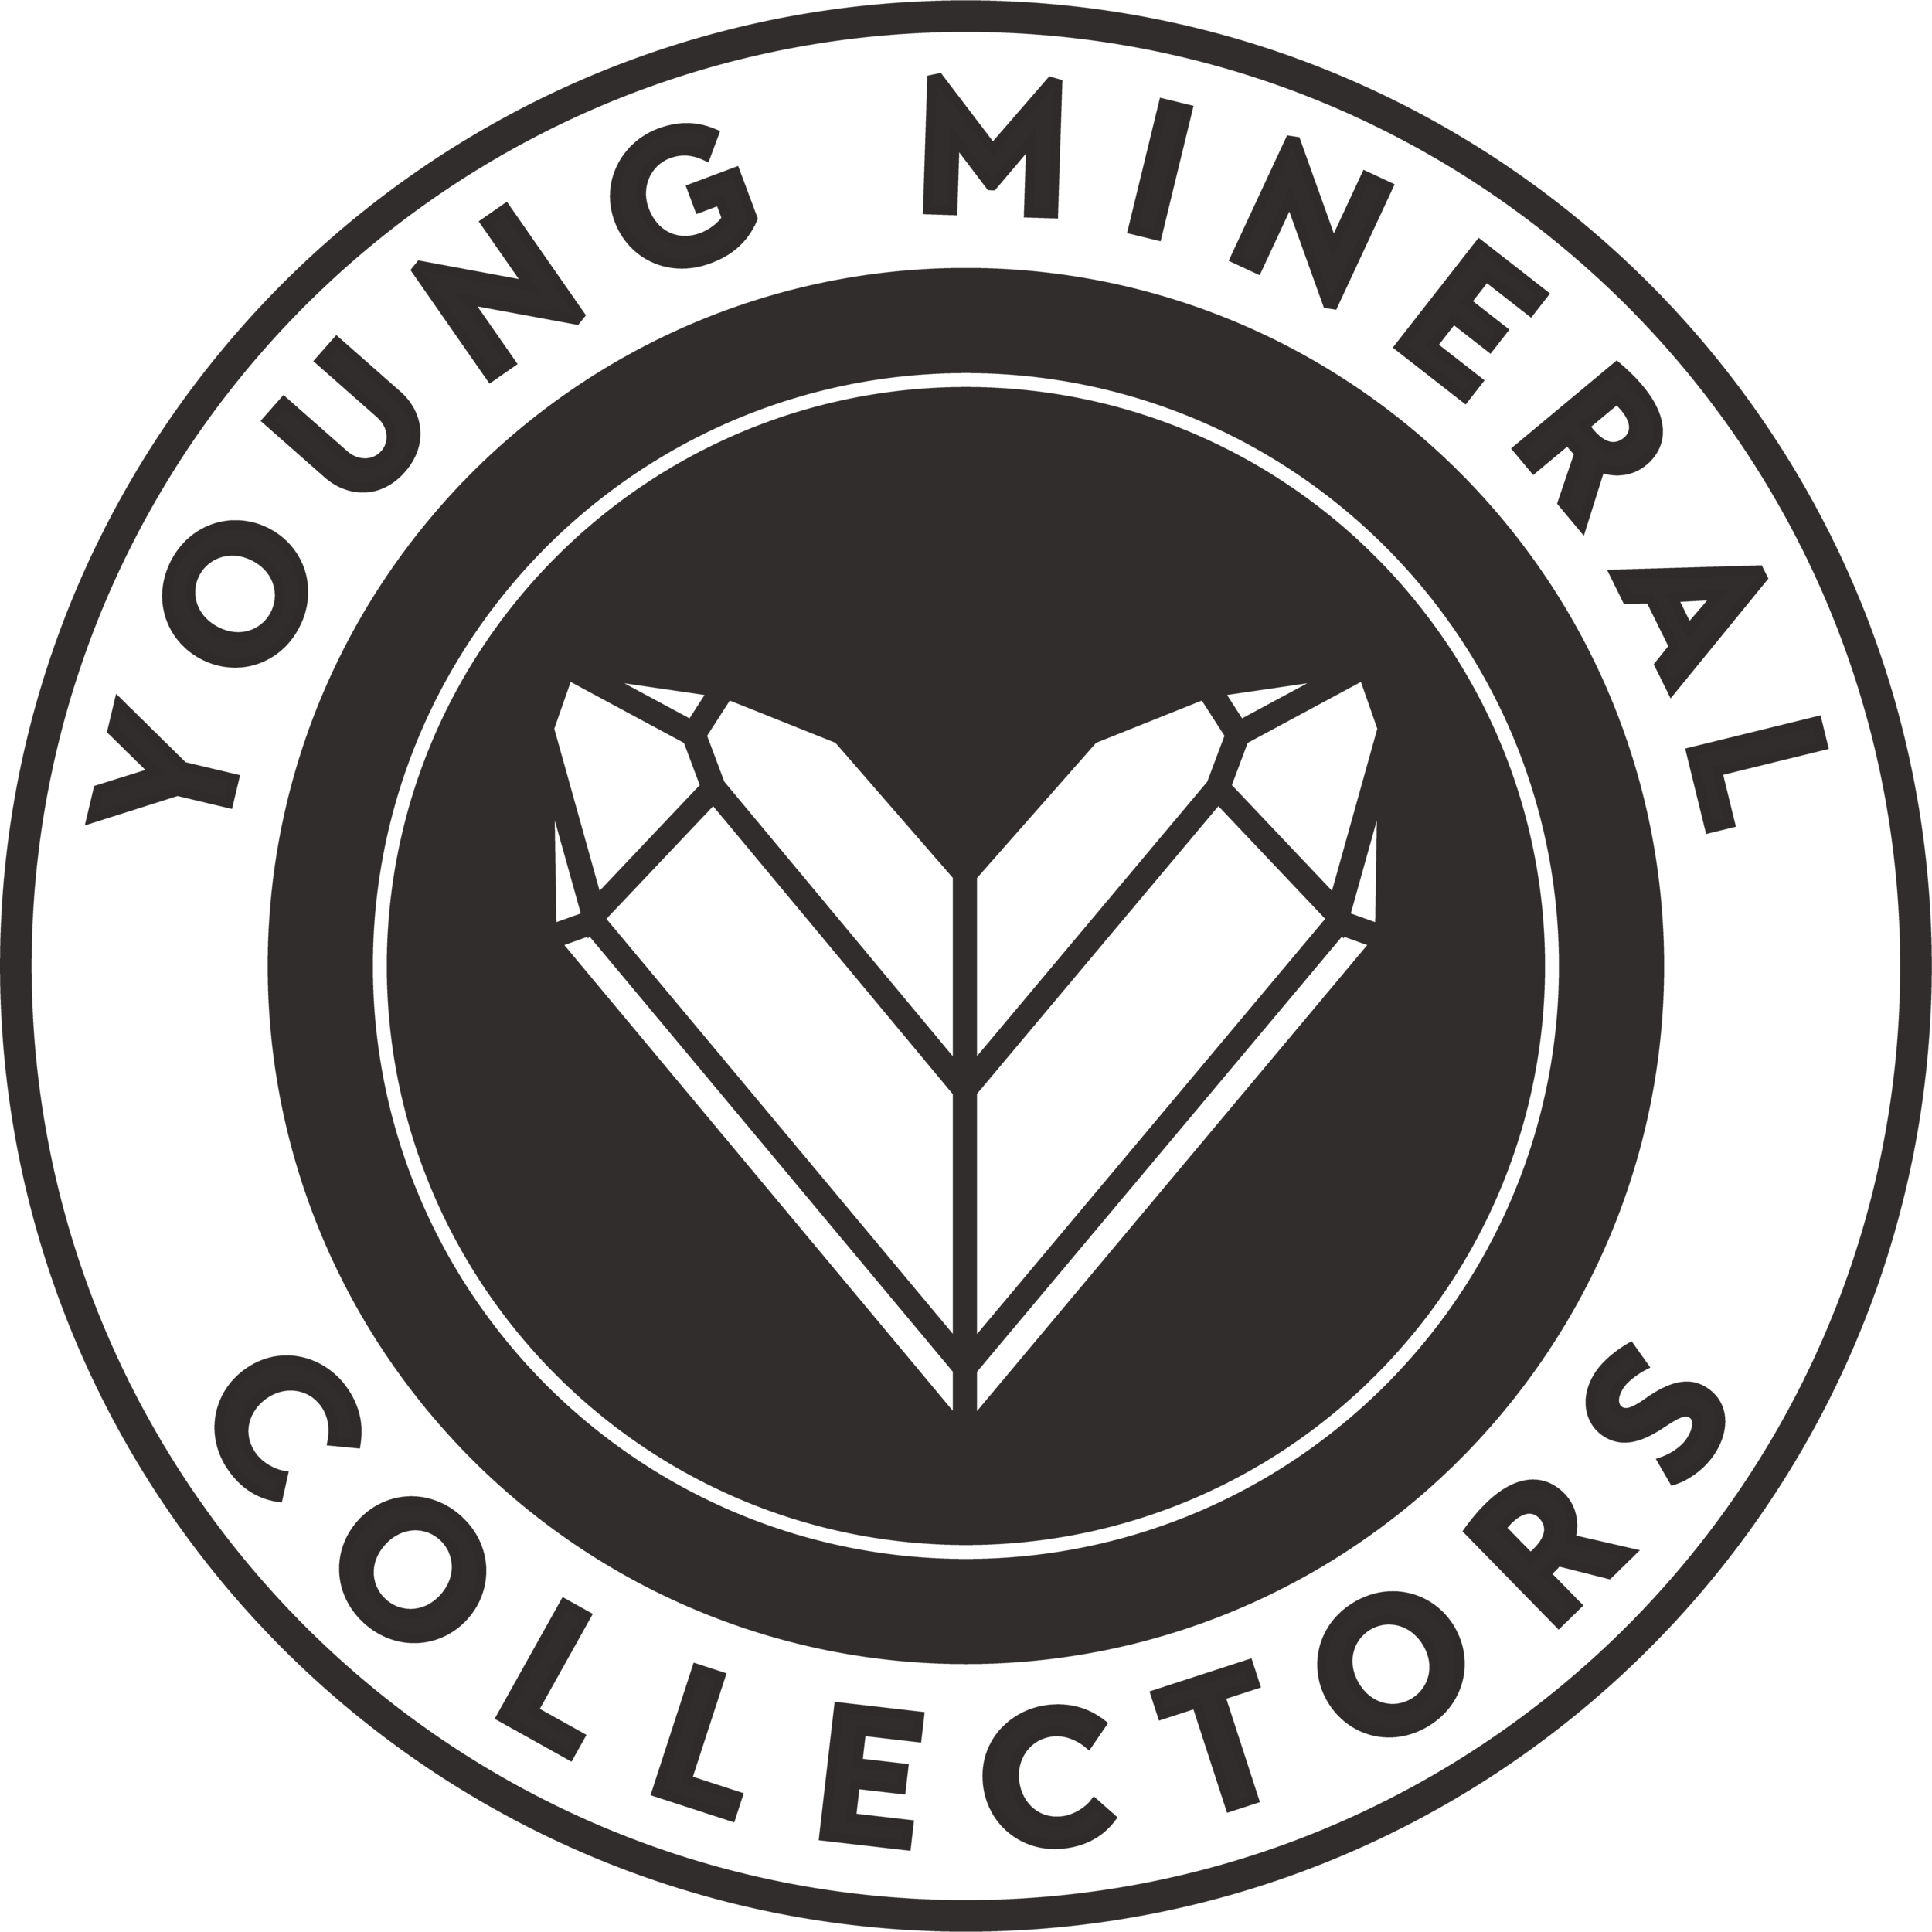 Young Mineral Collectors